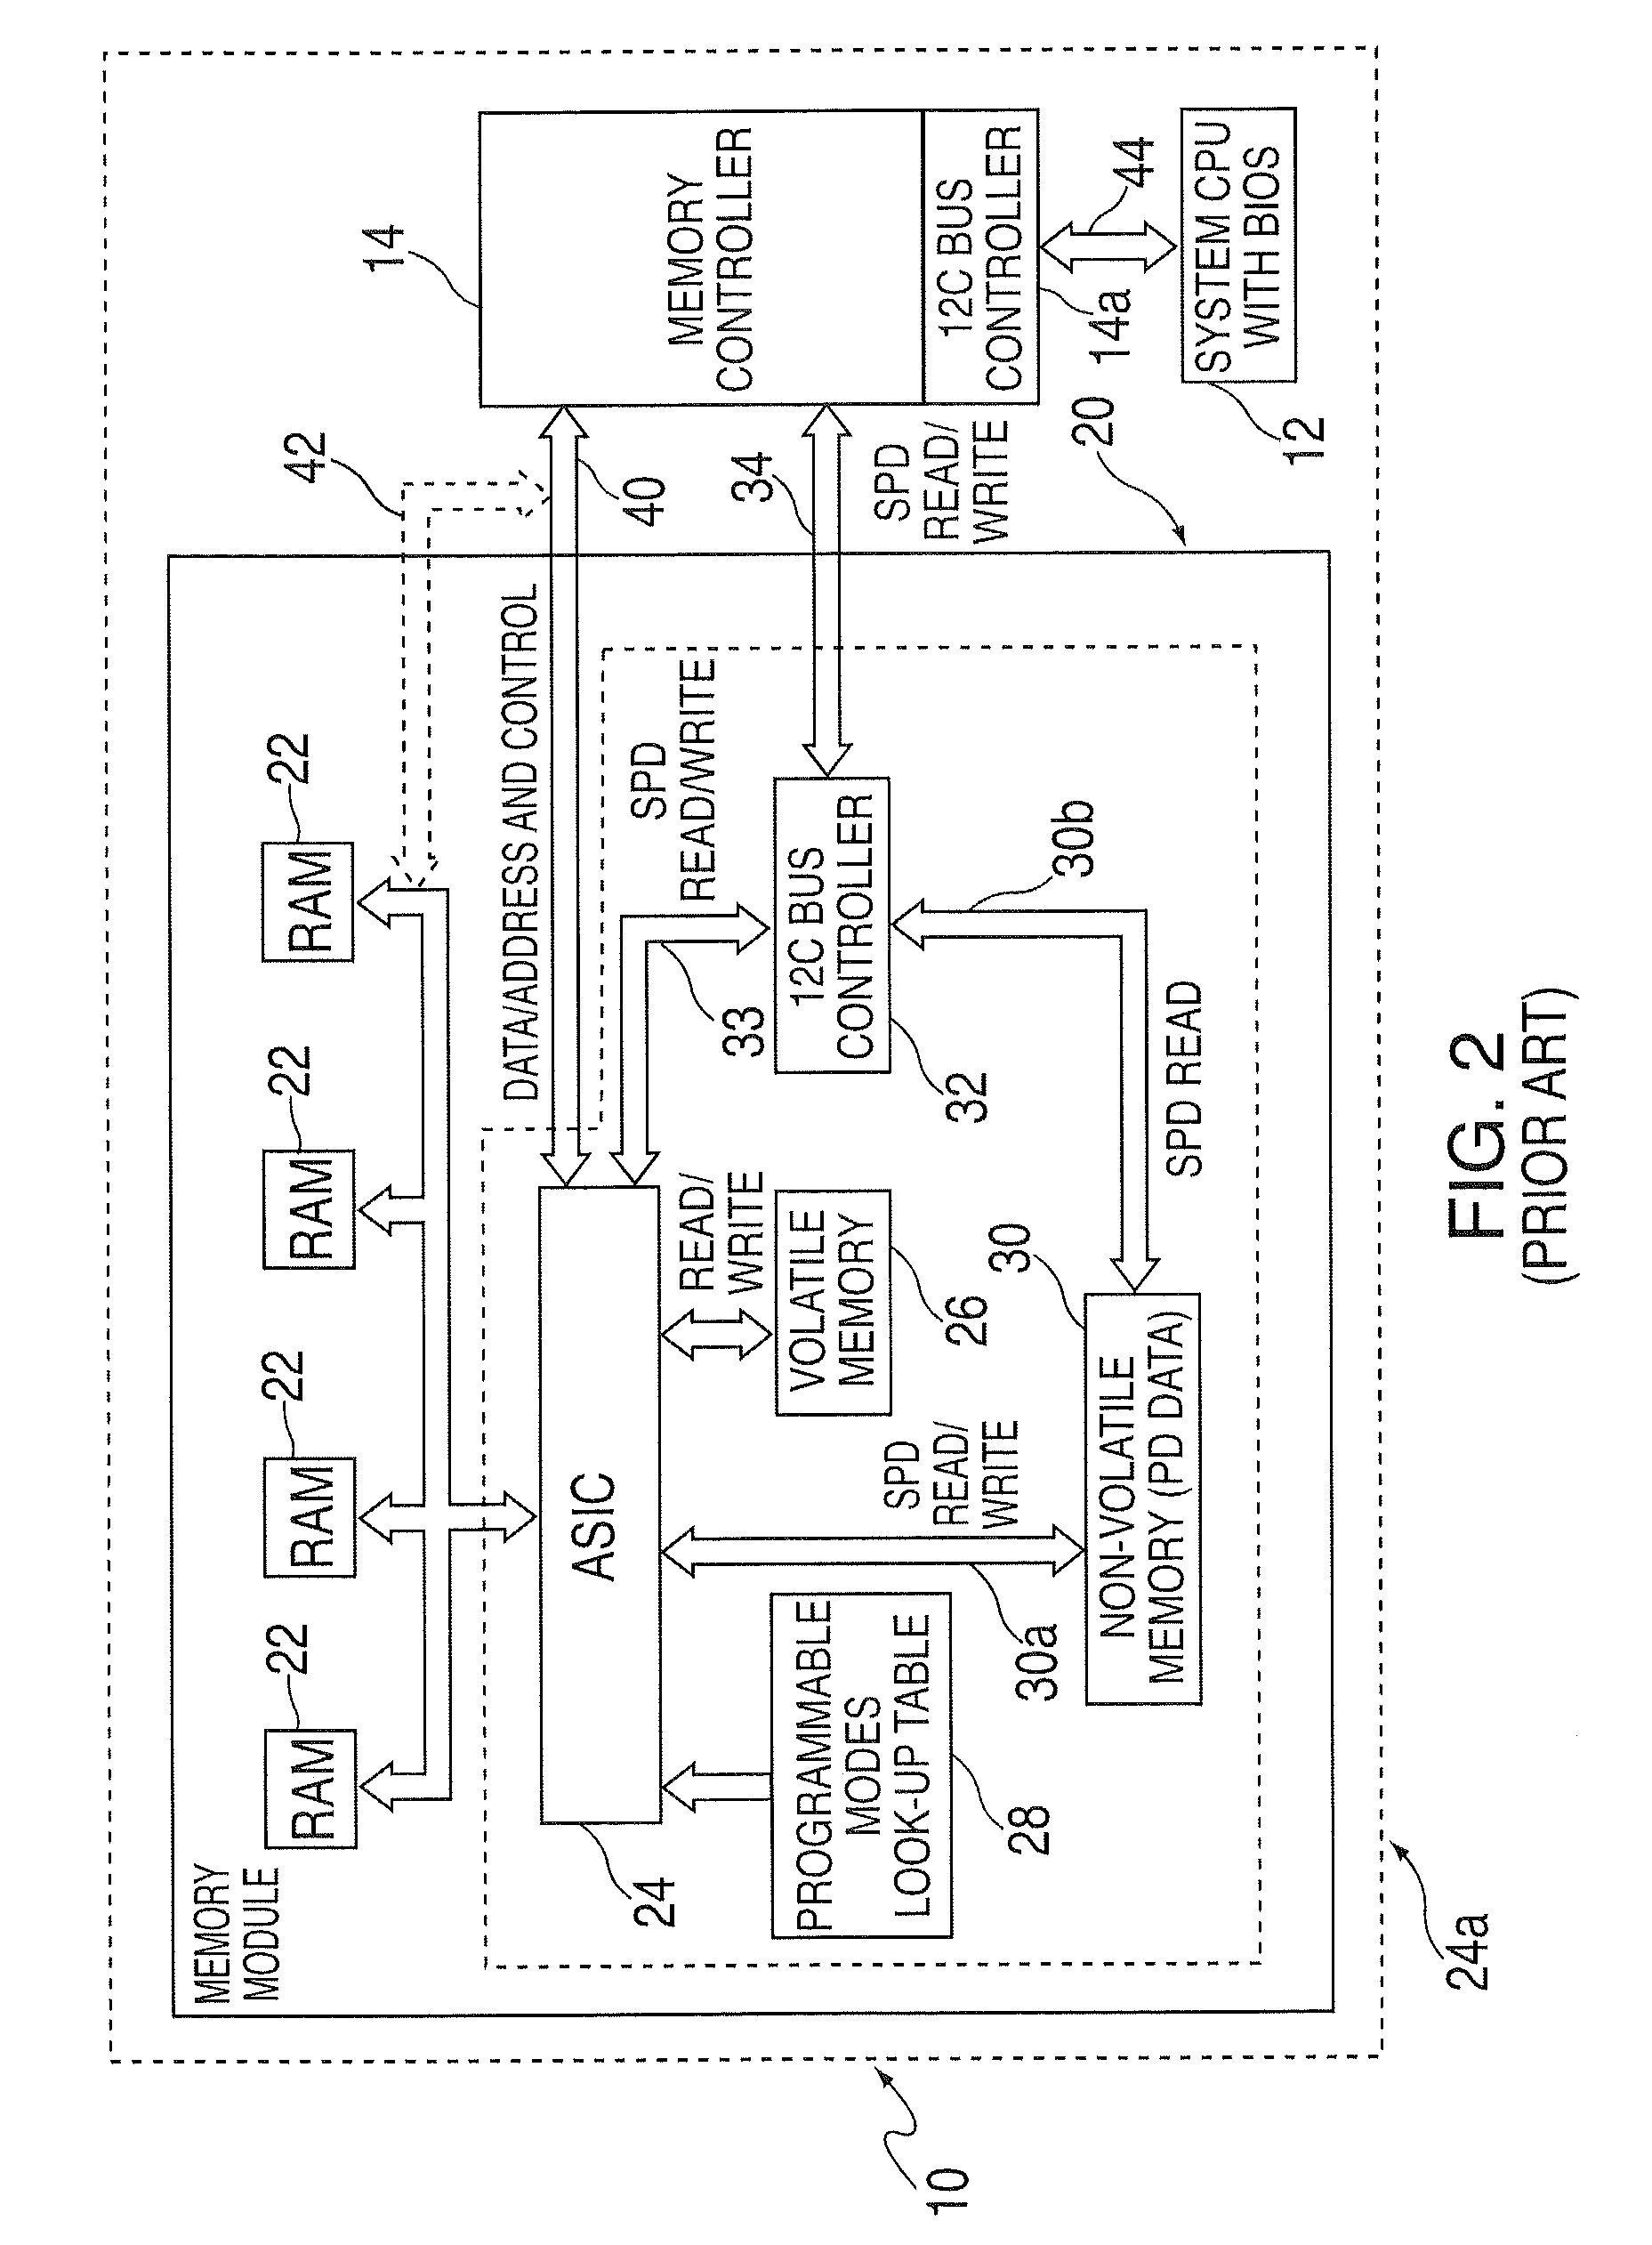 Methods for program directed memory access patterns